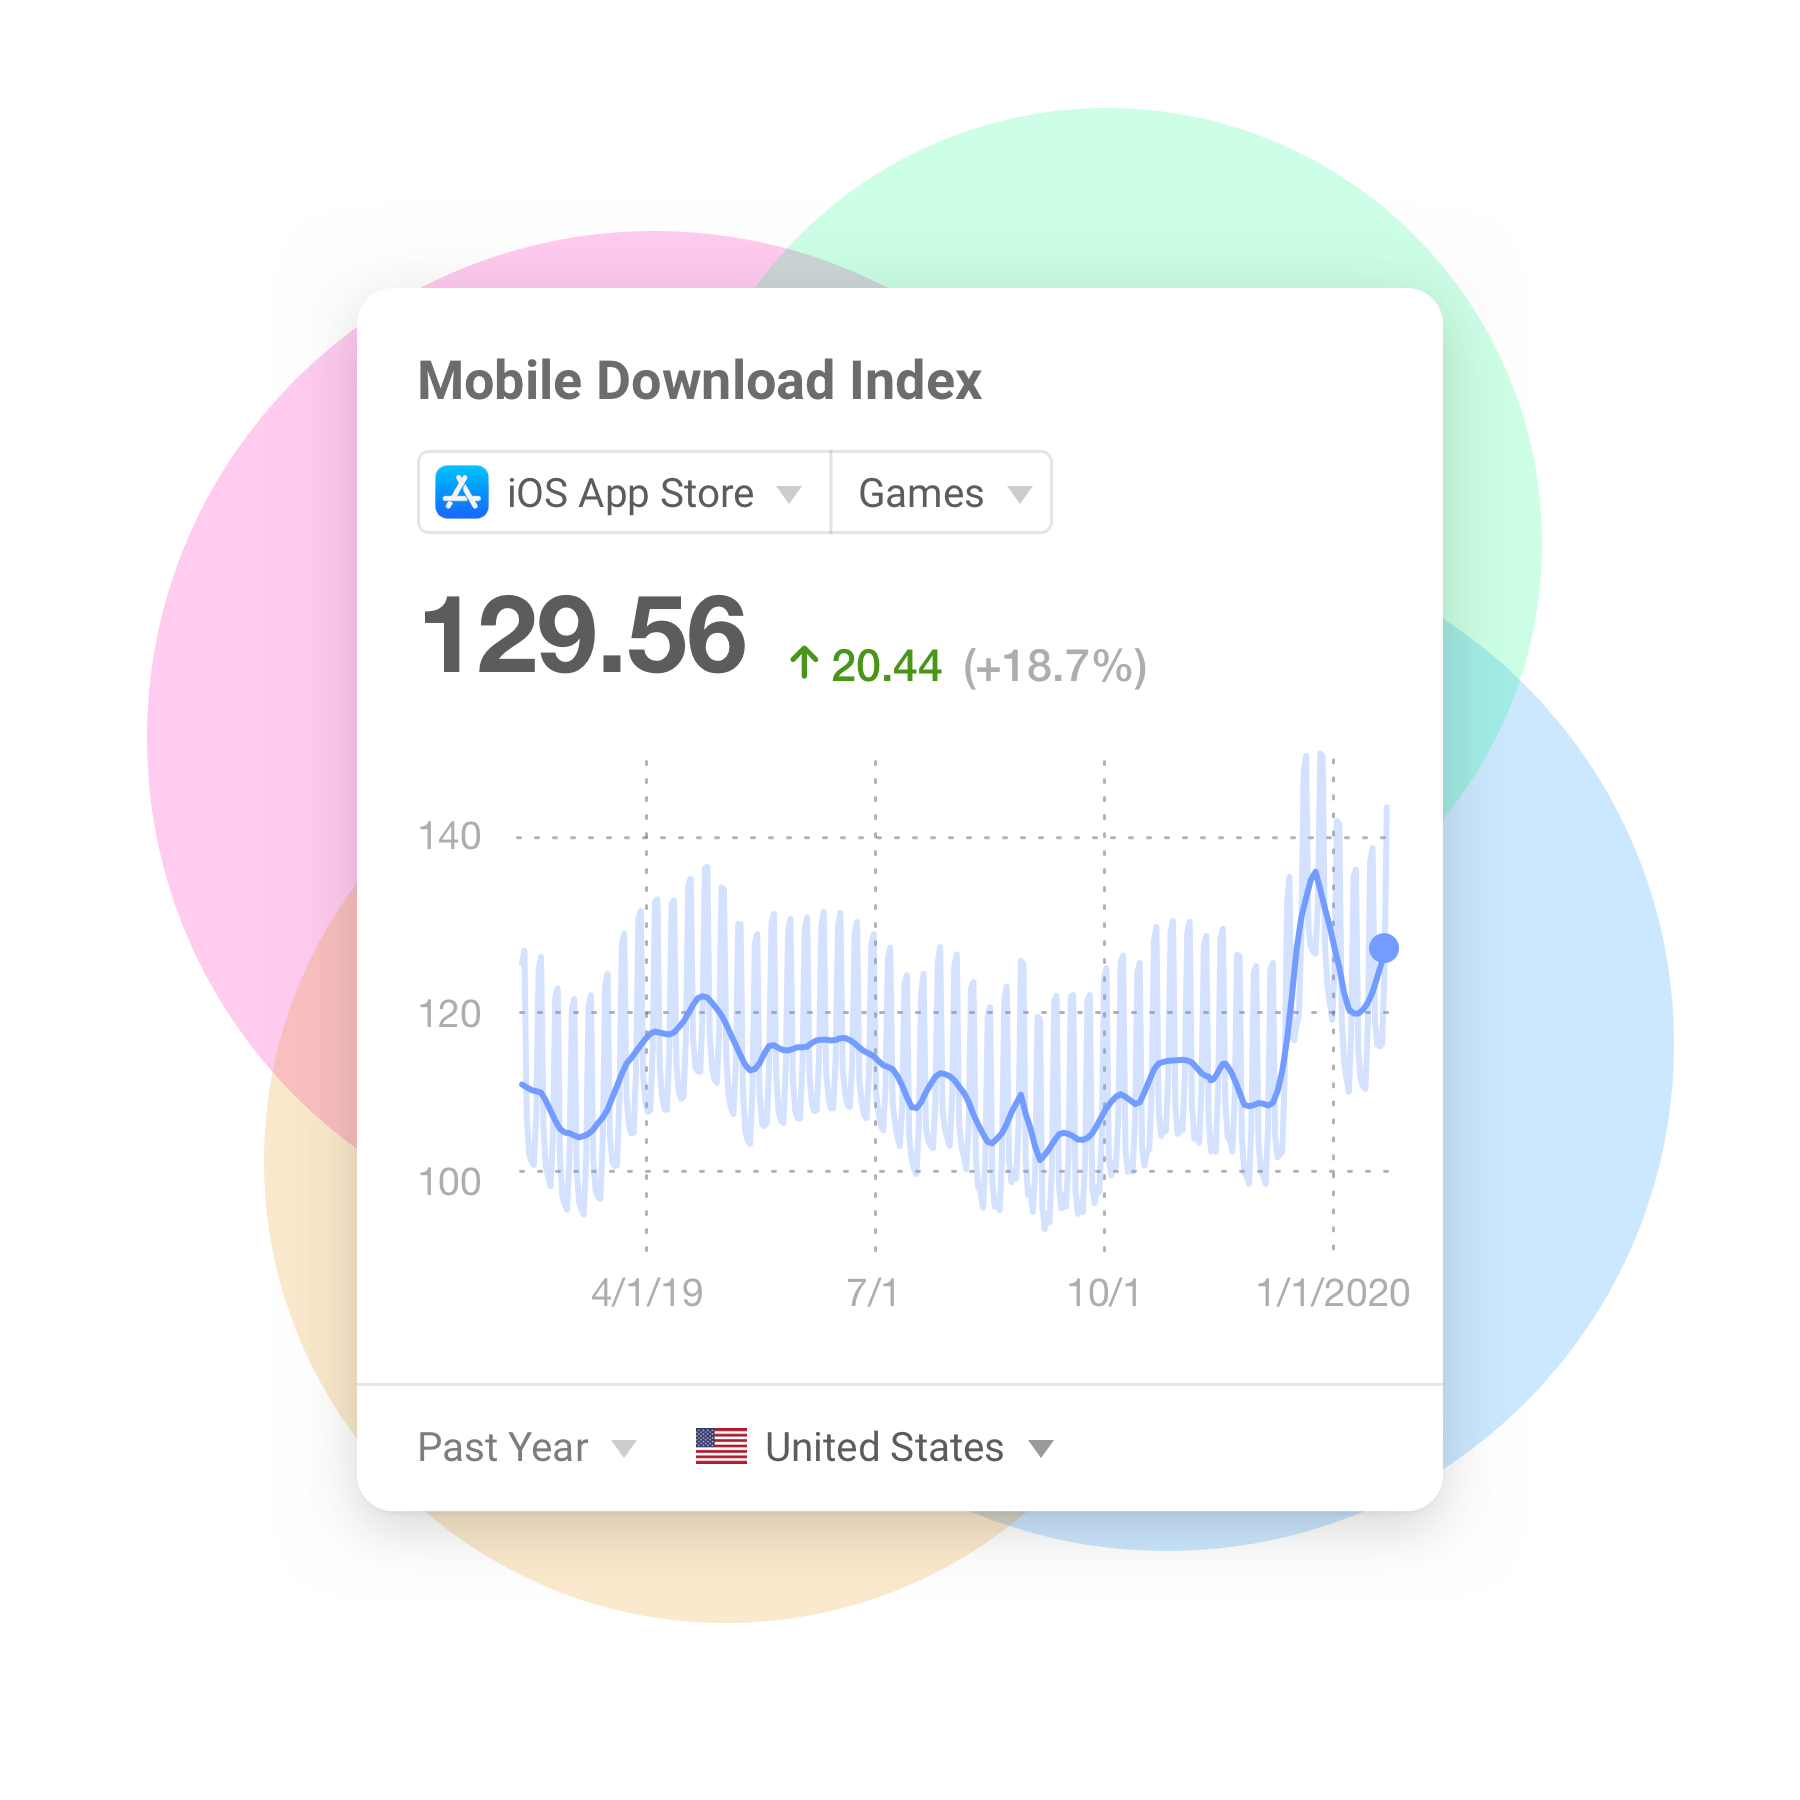 Benchmark Your Downloads With Real Market Intelligence For Free Introducing The Mobile Download Index App Store Insights From Appfigures